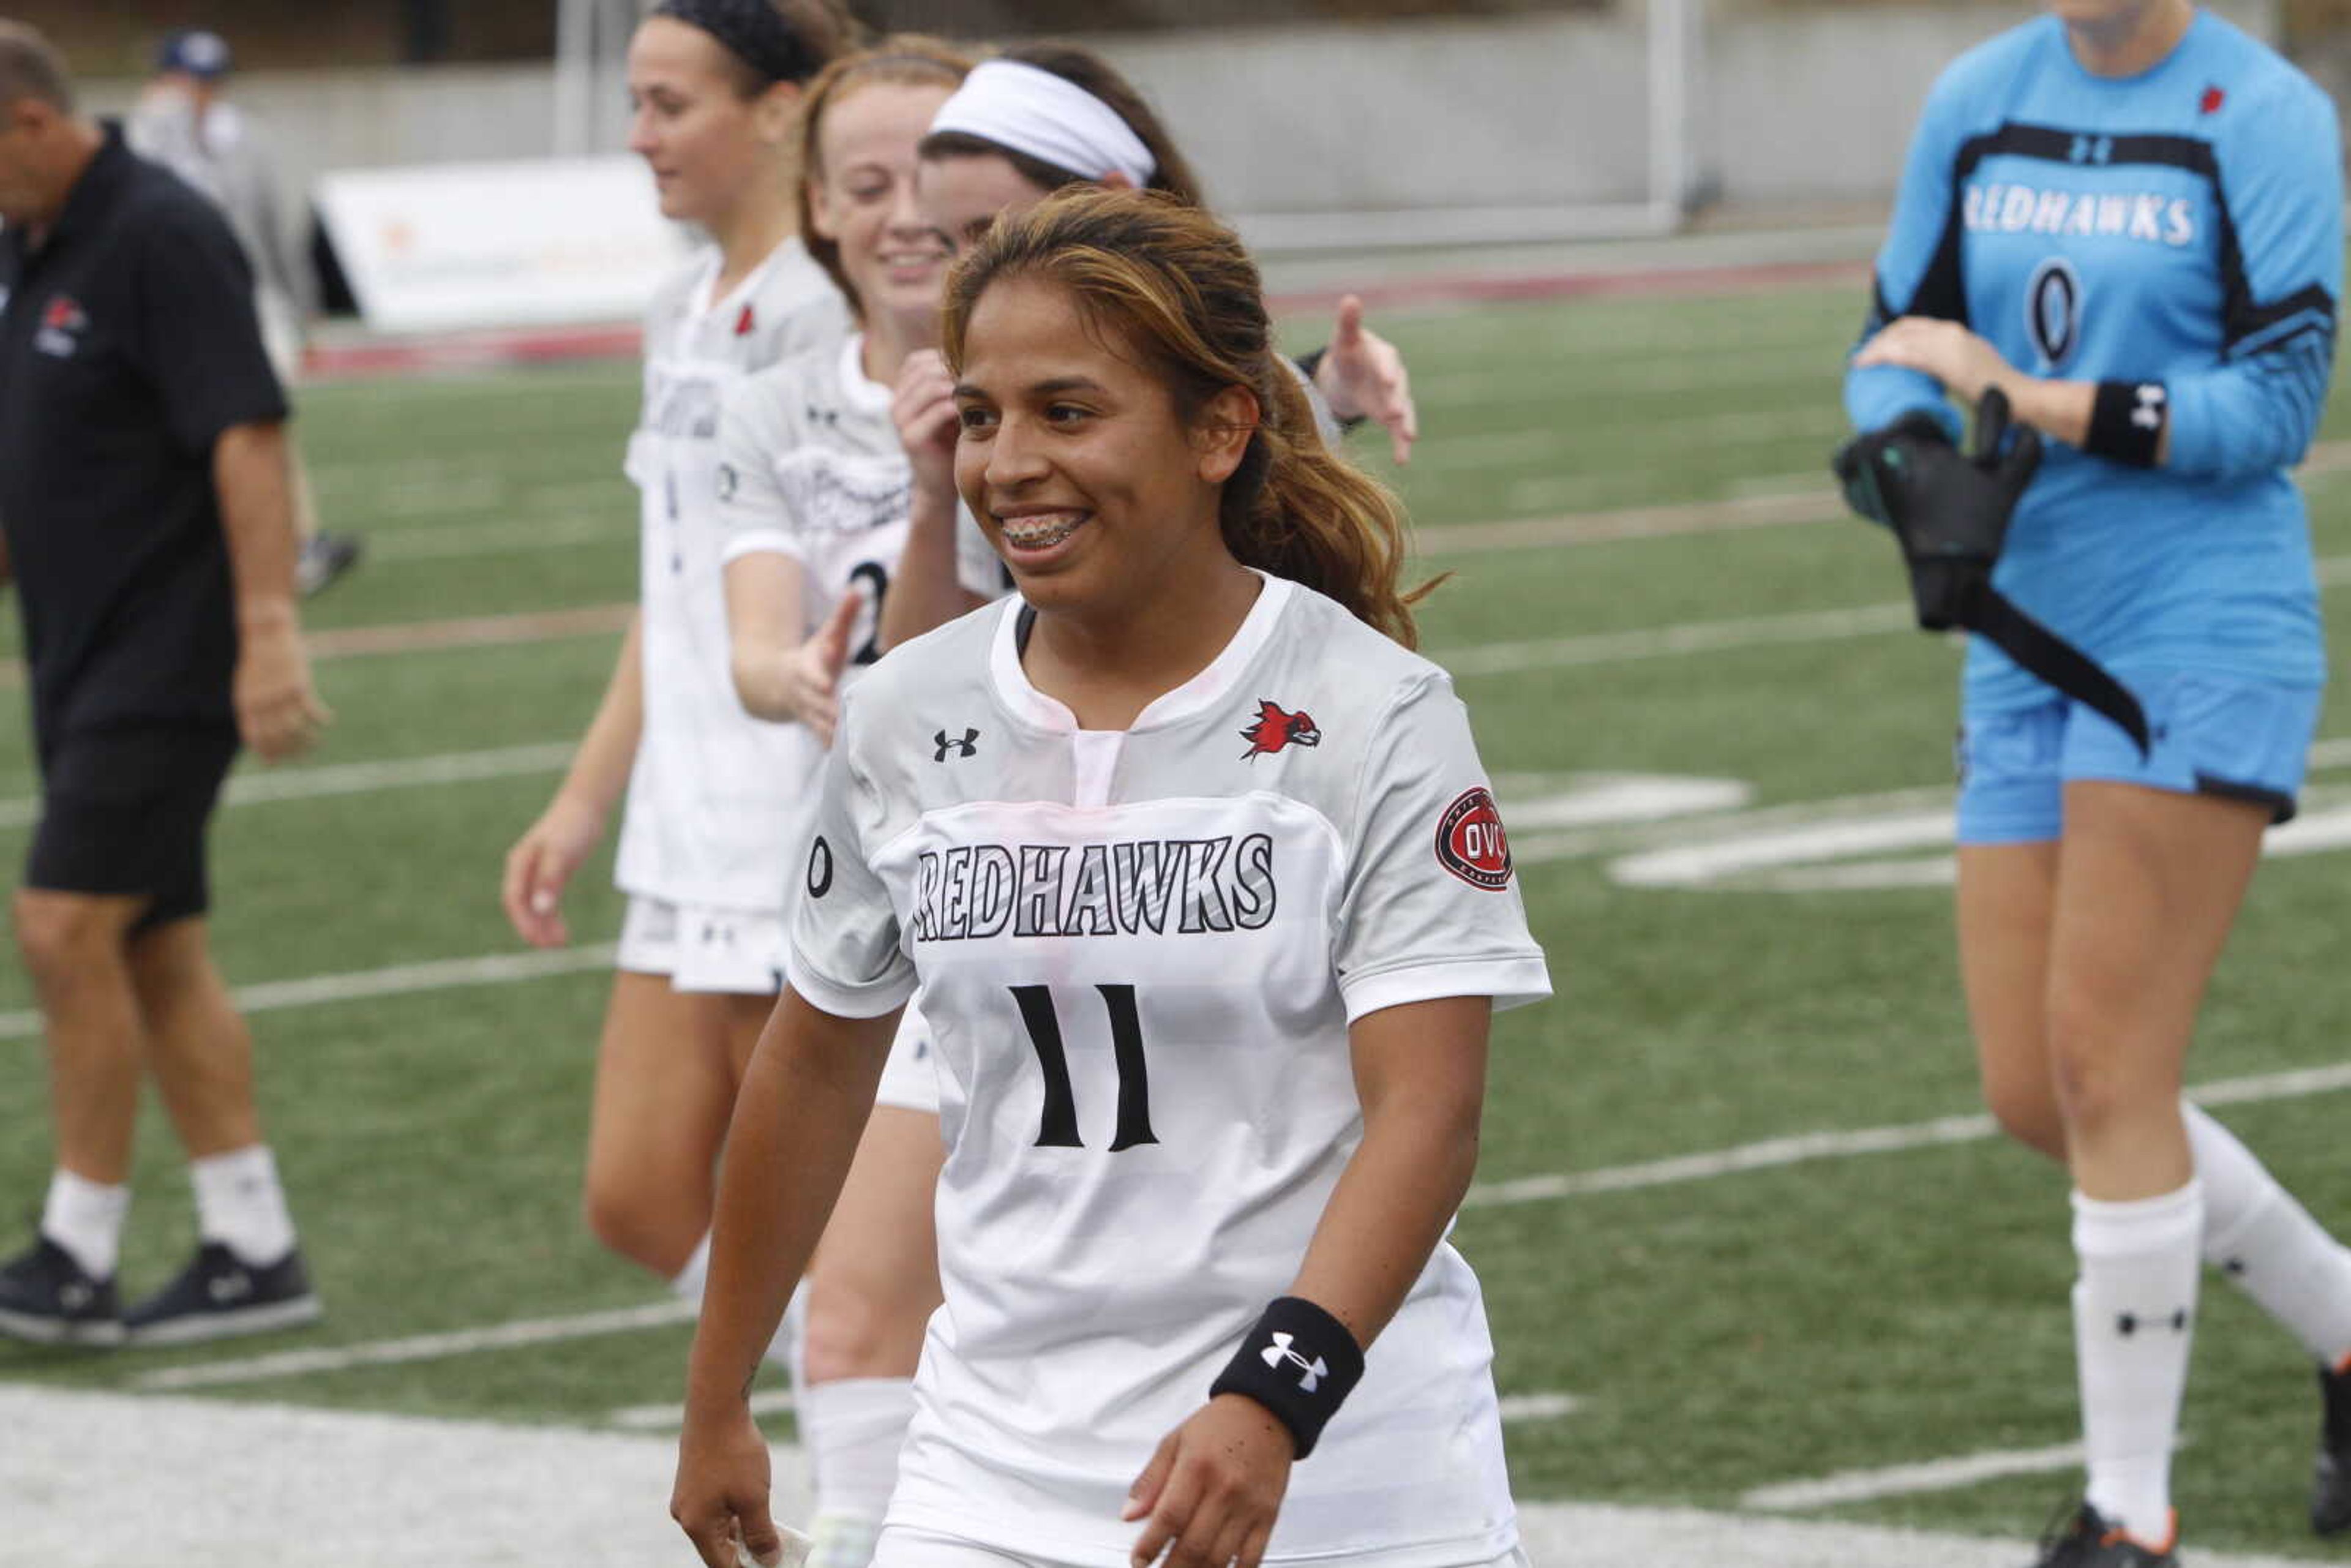 Senior midfielder Esmie Gonzales smiles as she exits the field after a 1-0 win over Oral Roberts on Sept. 9.